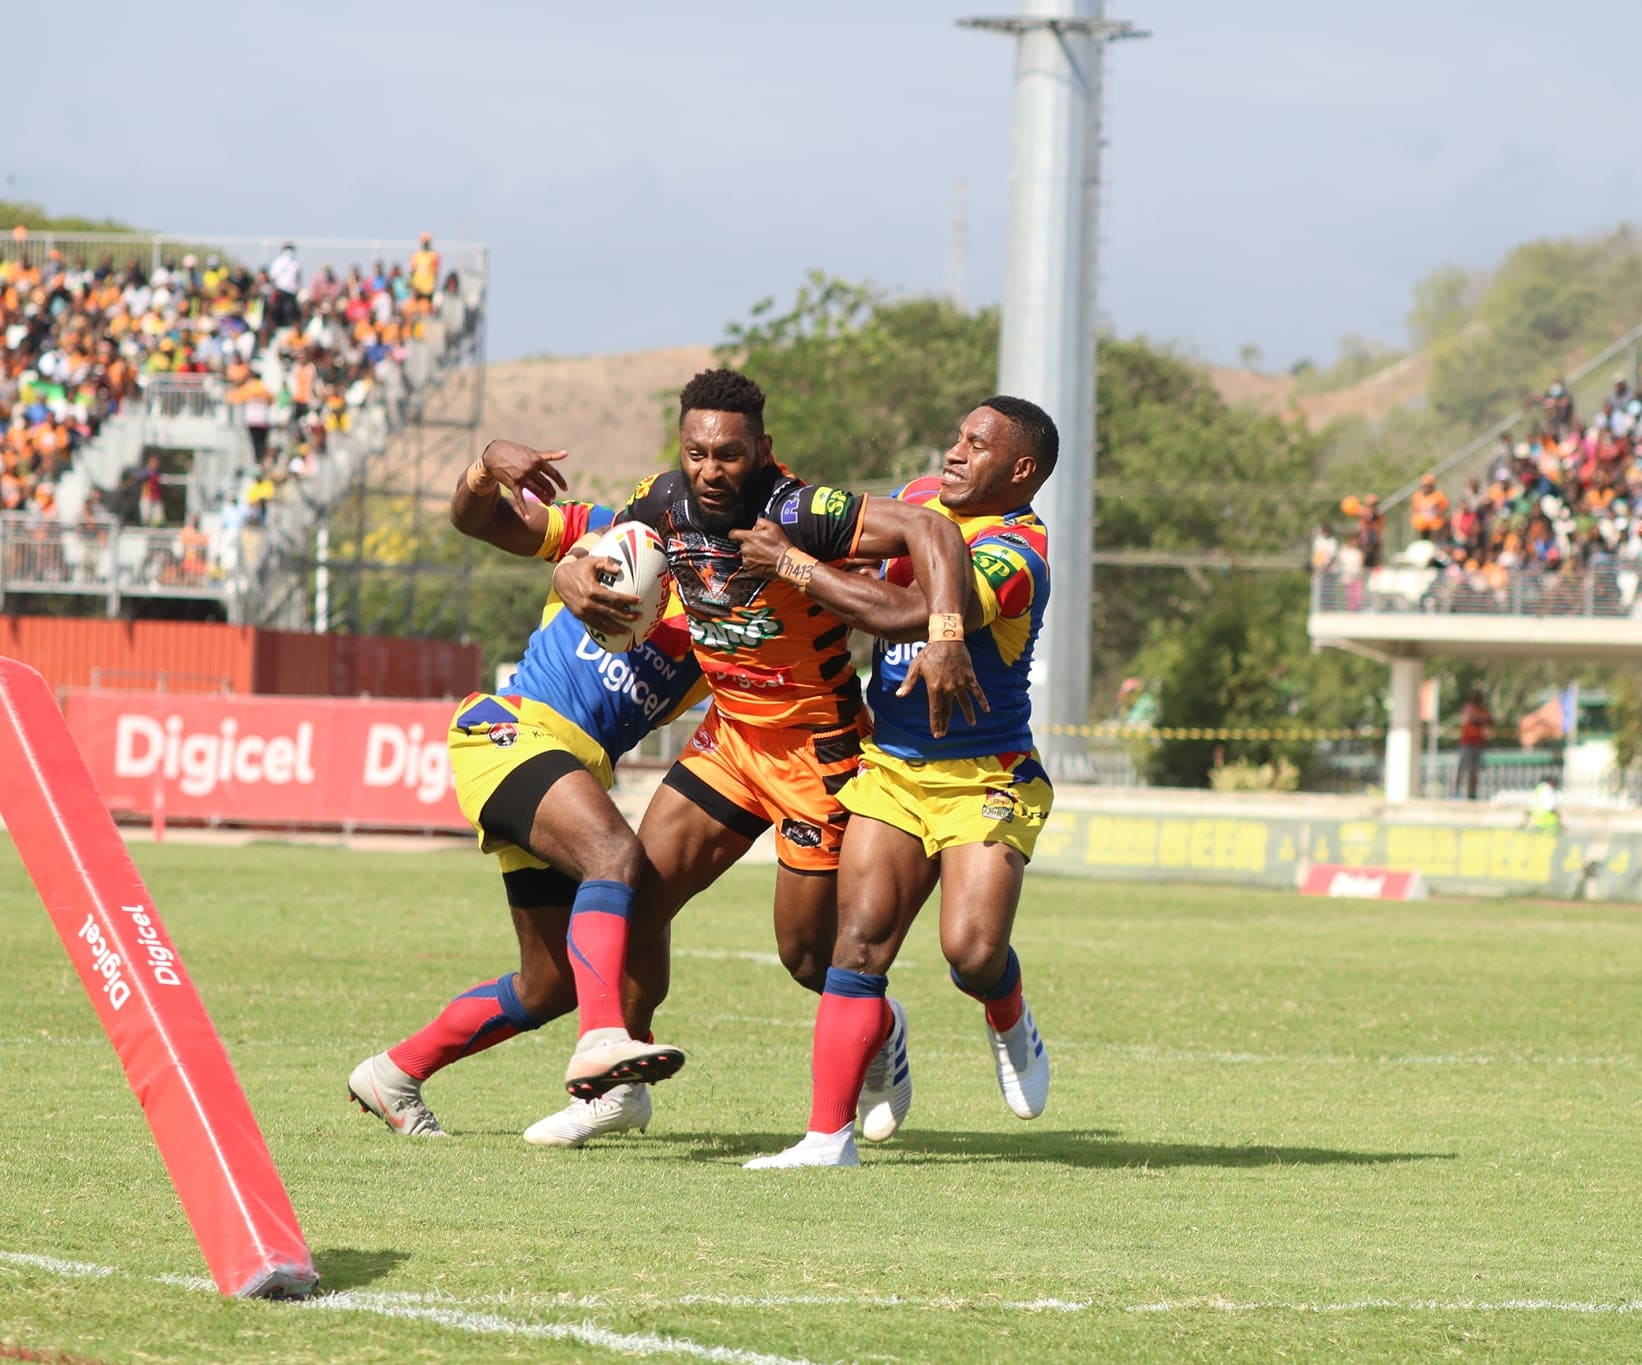 The Digicel Cup is Papua New Guinea's premier domestic rugby league competition.